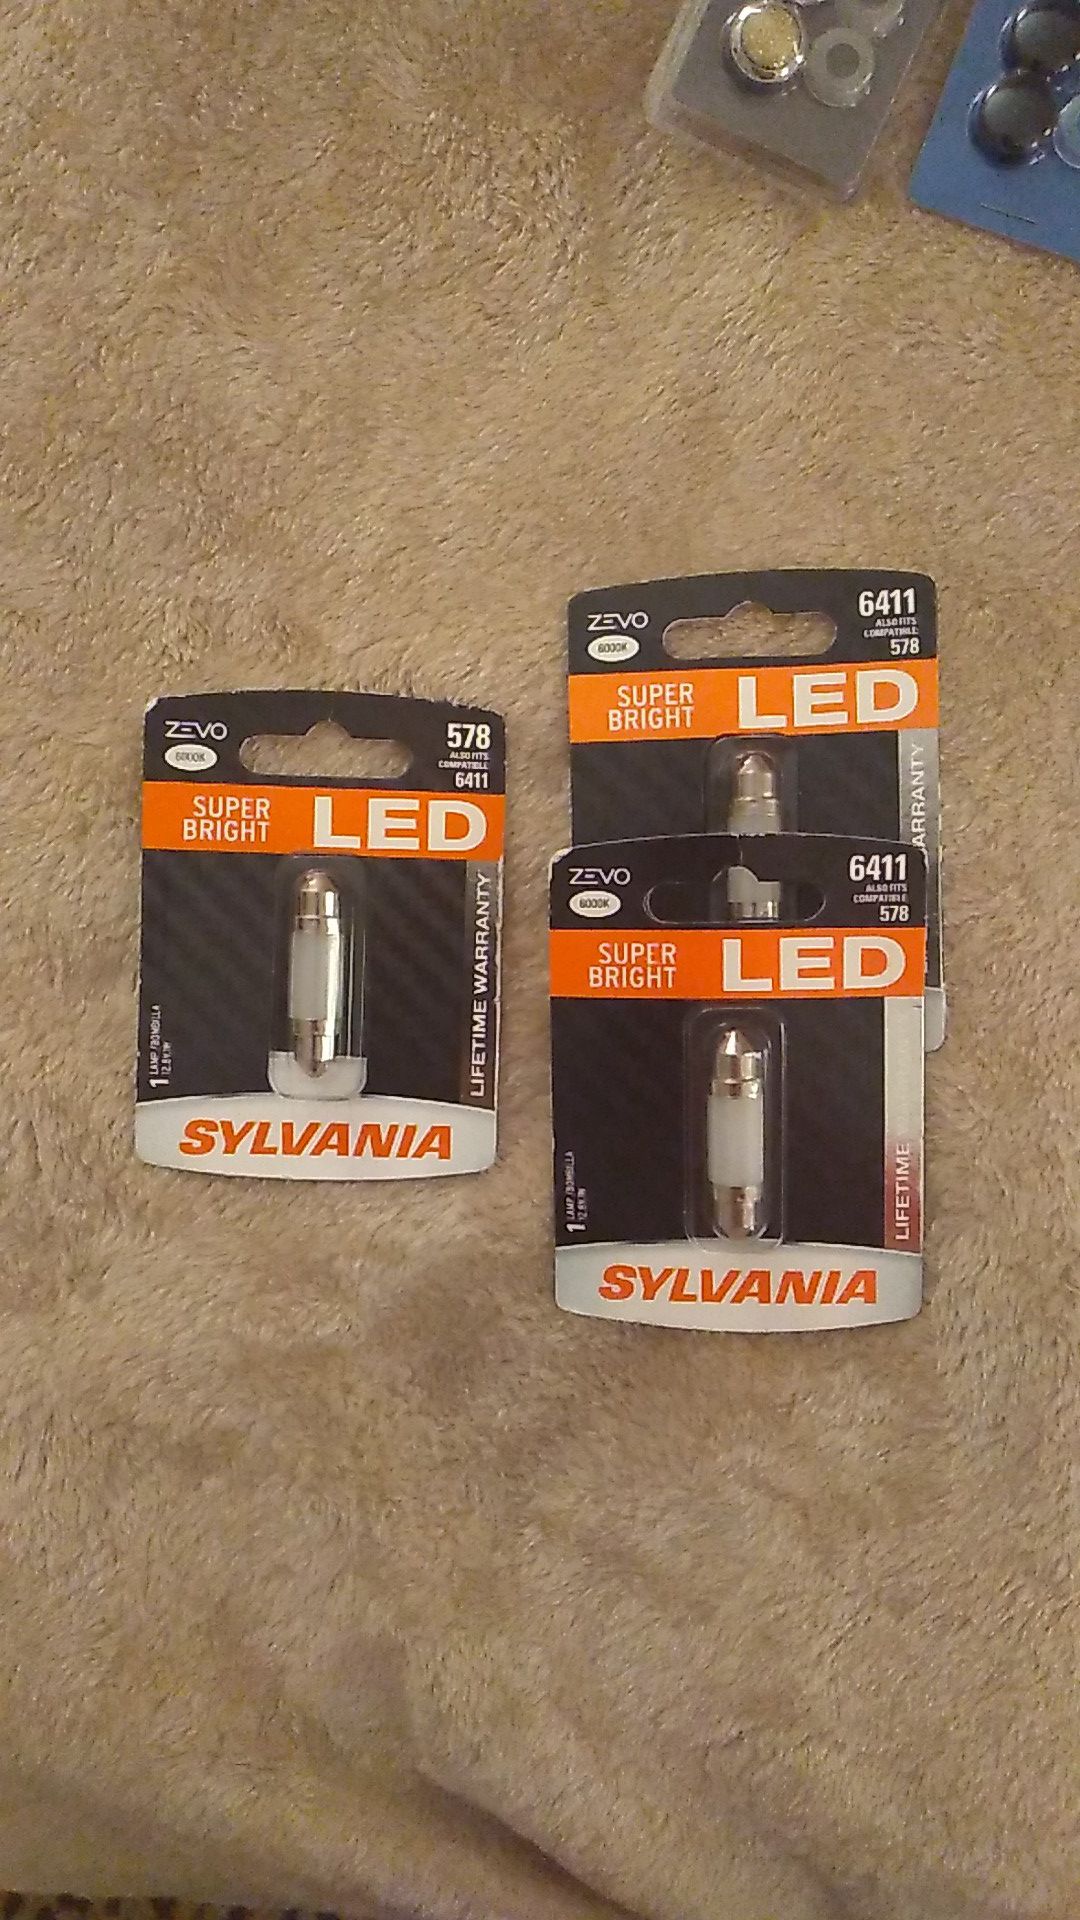 LED super bright BULBS for vehicles...